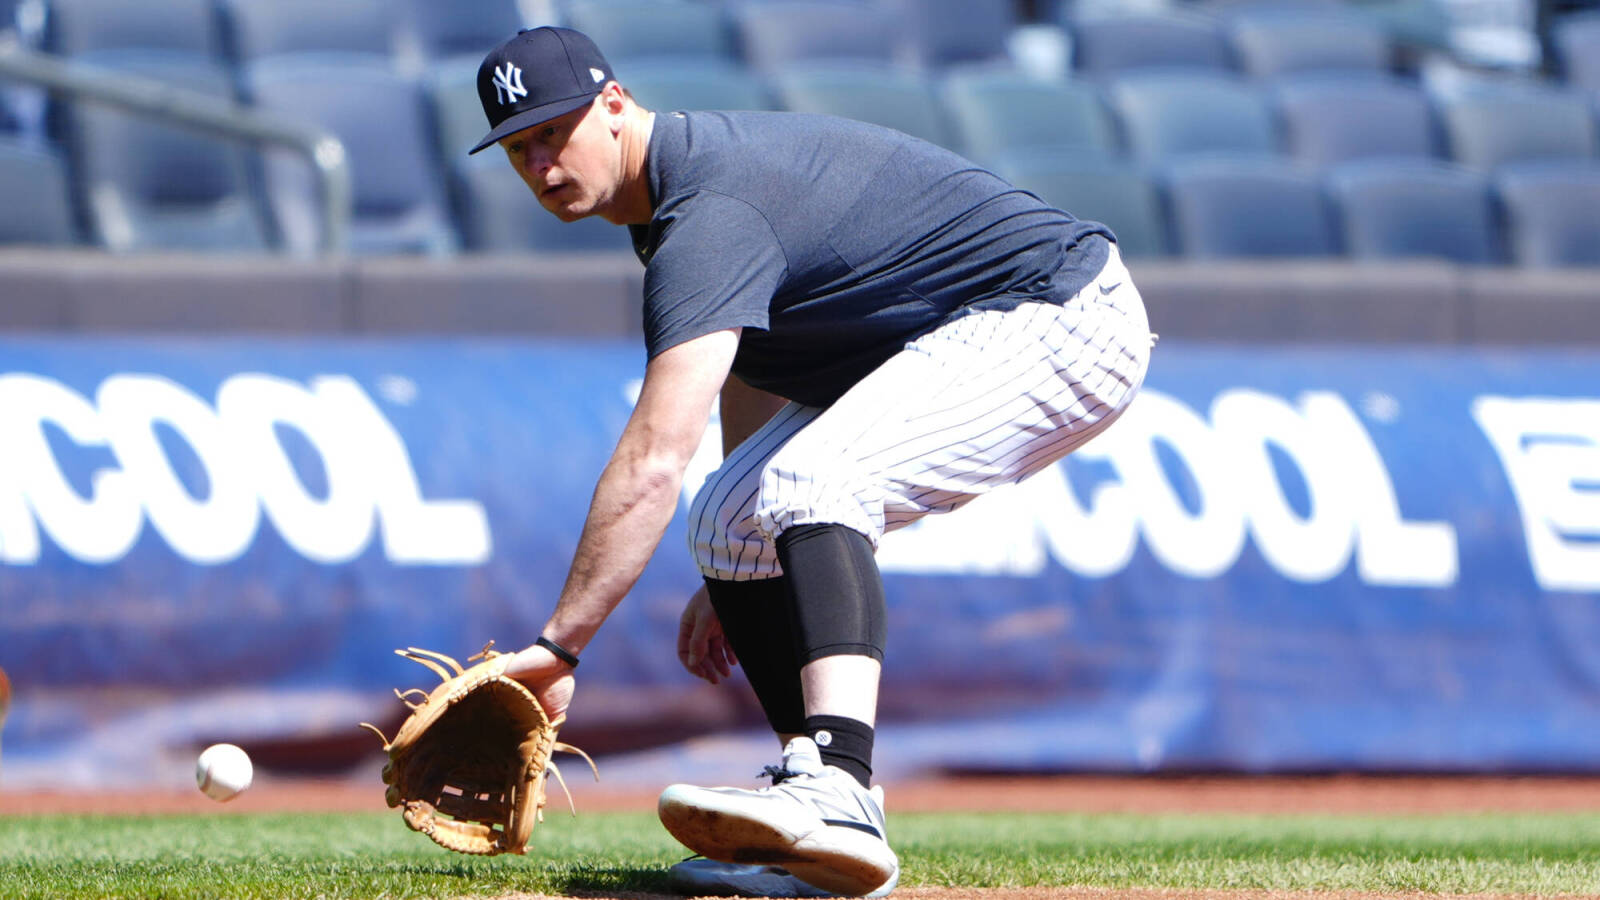 Yankees announce that veteran infielder will start rehab assignment today in Double-A